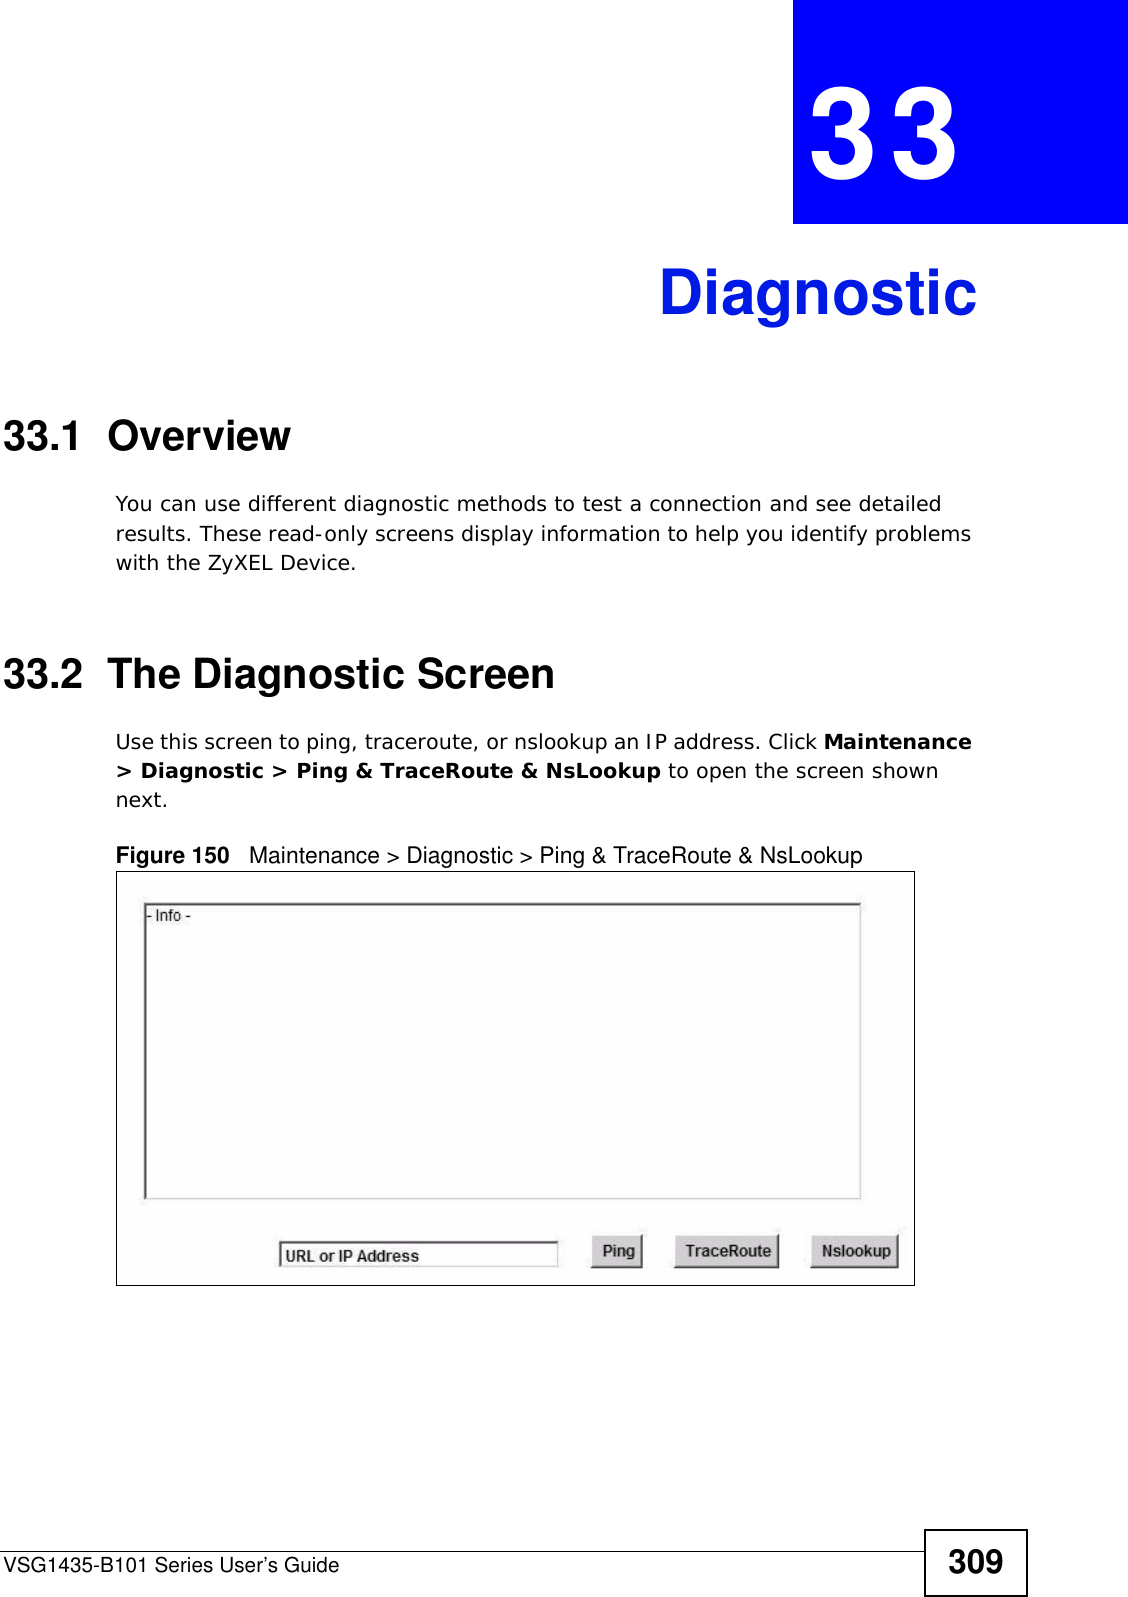 VSG1435-B101 Series User’s Guide 309CHAPTER  33 Diagnostic33.1  OverviewYou can use different diagnostic methods to test a connection and see detailed results. These read-only screens display information to help you identify problems with the ZyXEL Device.33.2  The Diagnostic Screen Use this screen to ping, traceroute, or nslookup an IP address. Click Maintenance &gt; Diagnostic &gt; Ping &amp; TraceRoute &amp; NsLookup to open the screen shown next.Figure 150   Maintenance &gt; Diagnostic &gt; Ping &amp; TraceRoute &amp; NsLookup 